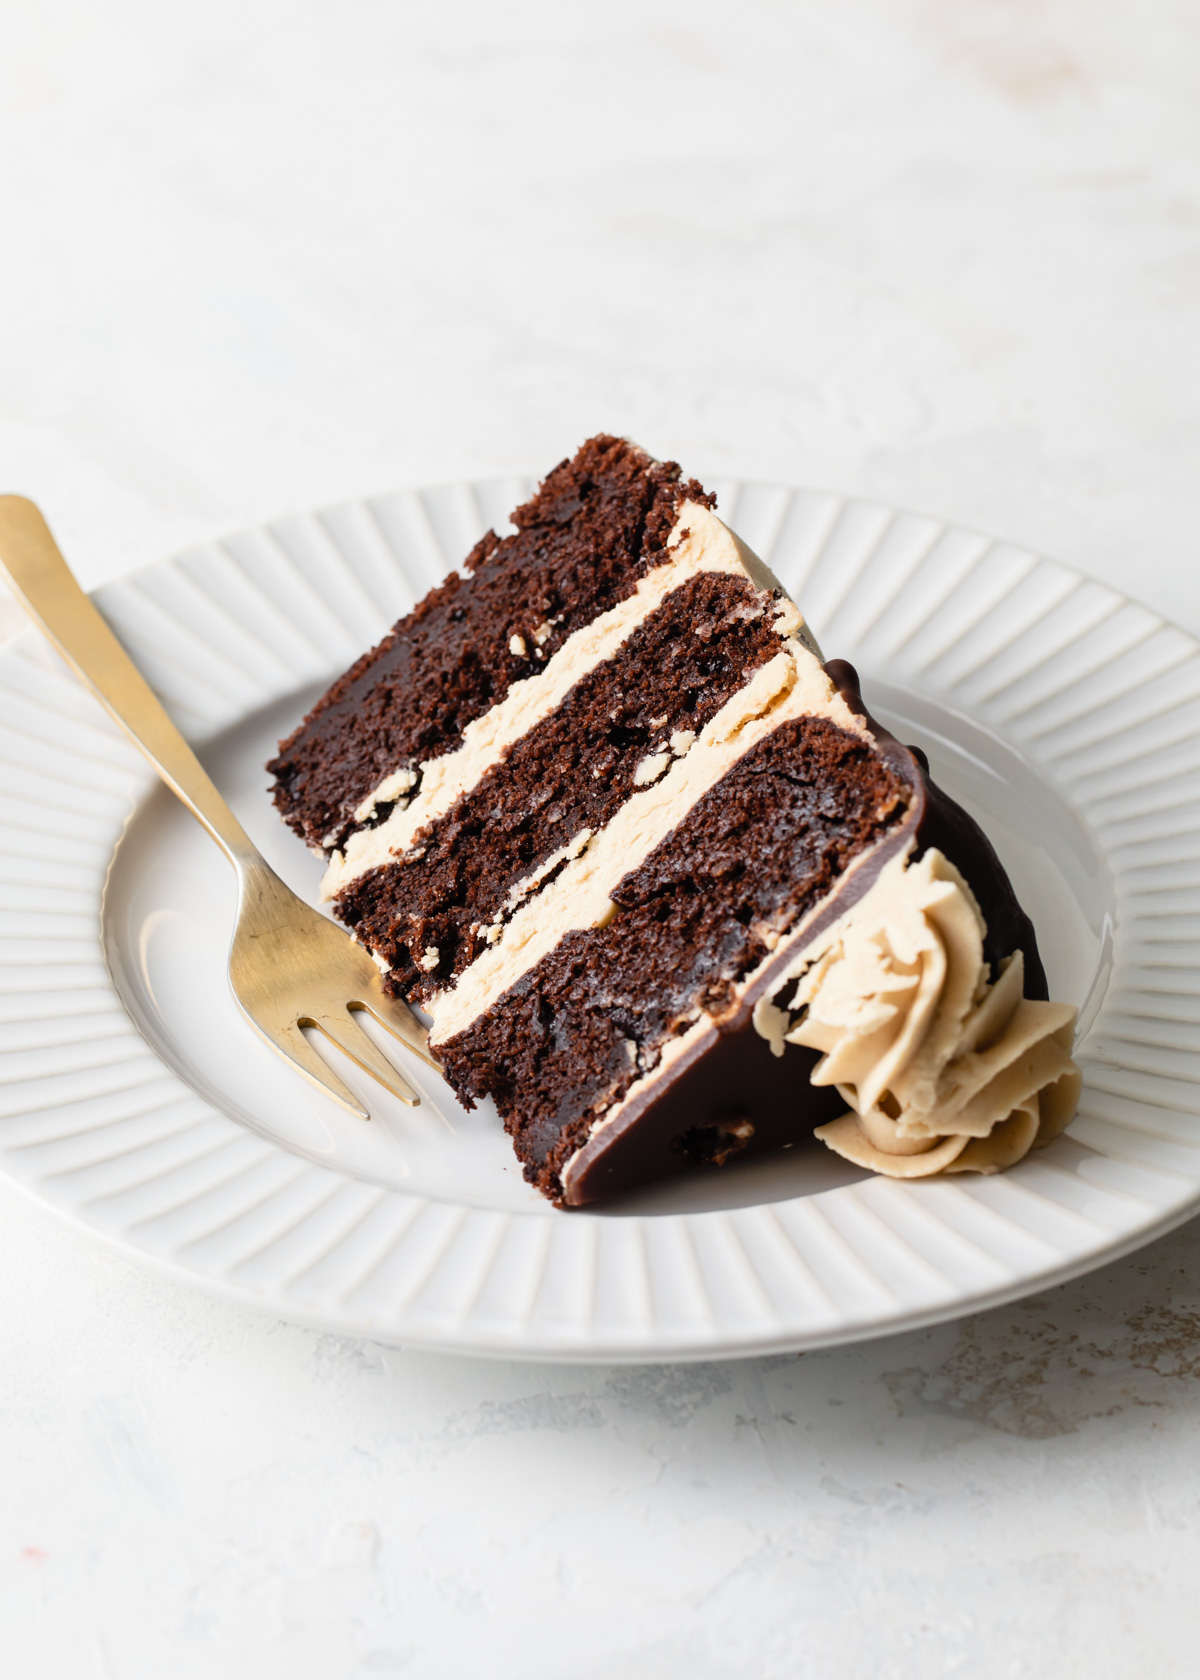 A slice of three-layer chocolate cake with peanut butter buttercream